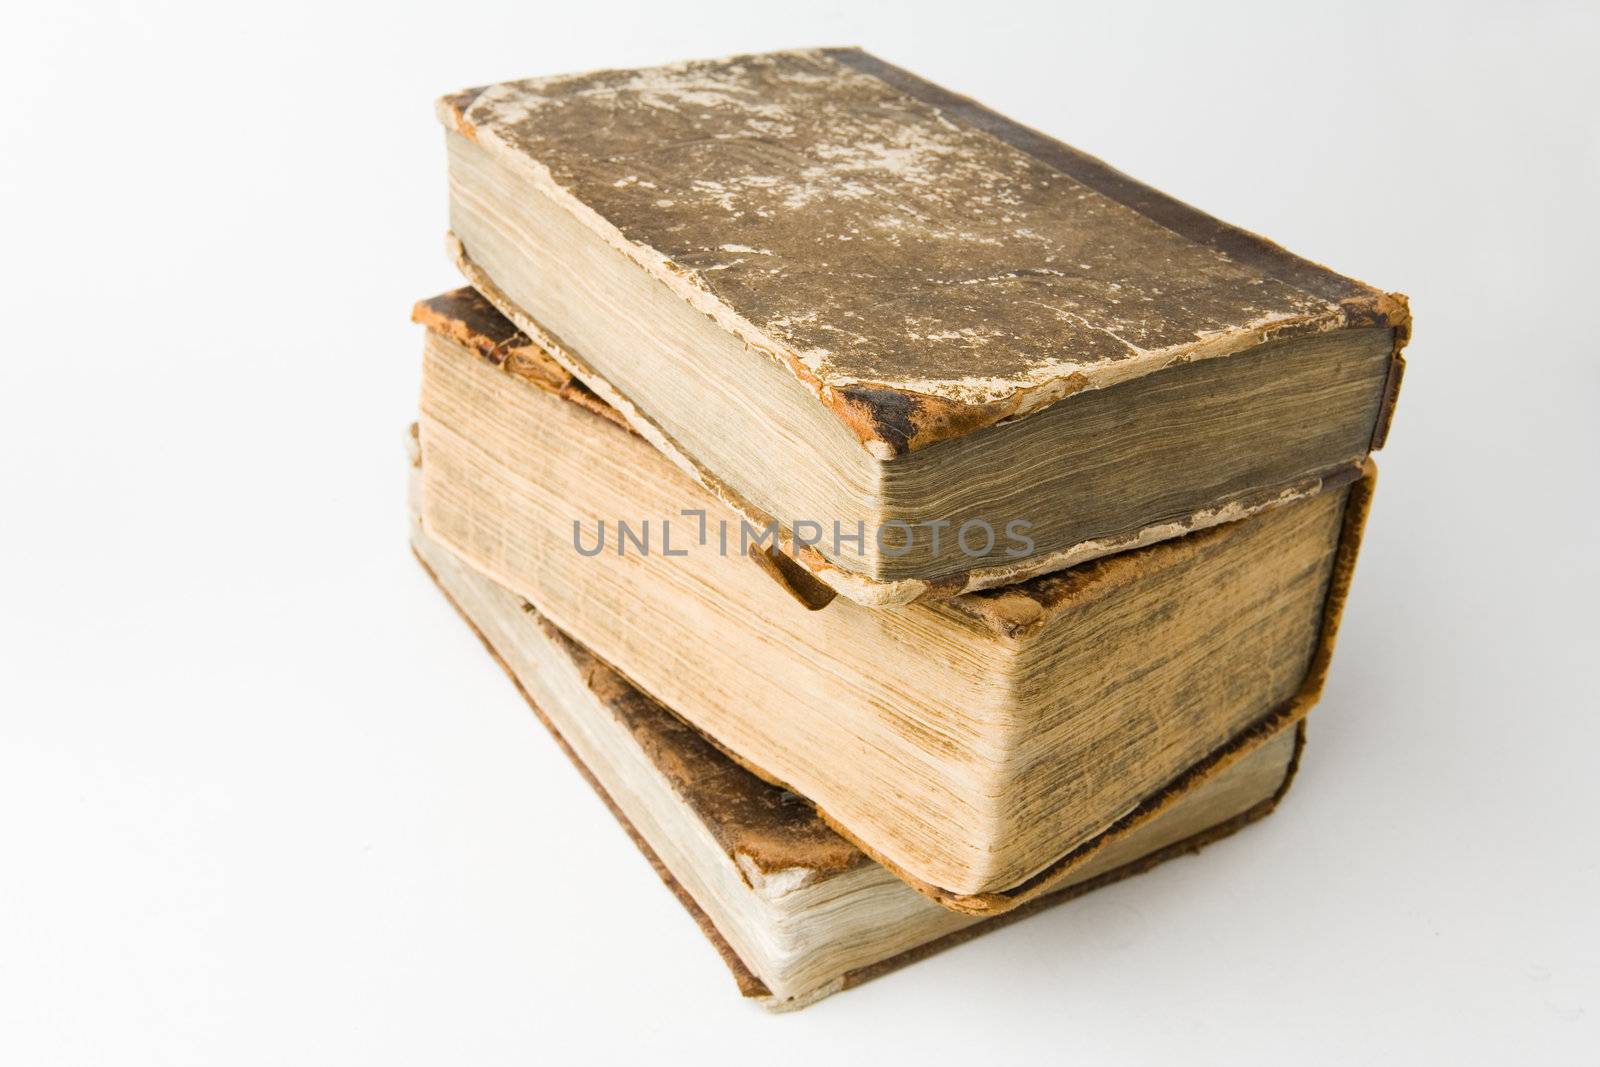 Antique books piled on a white background